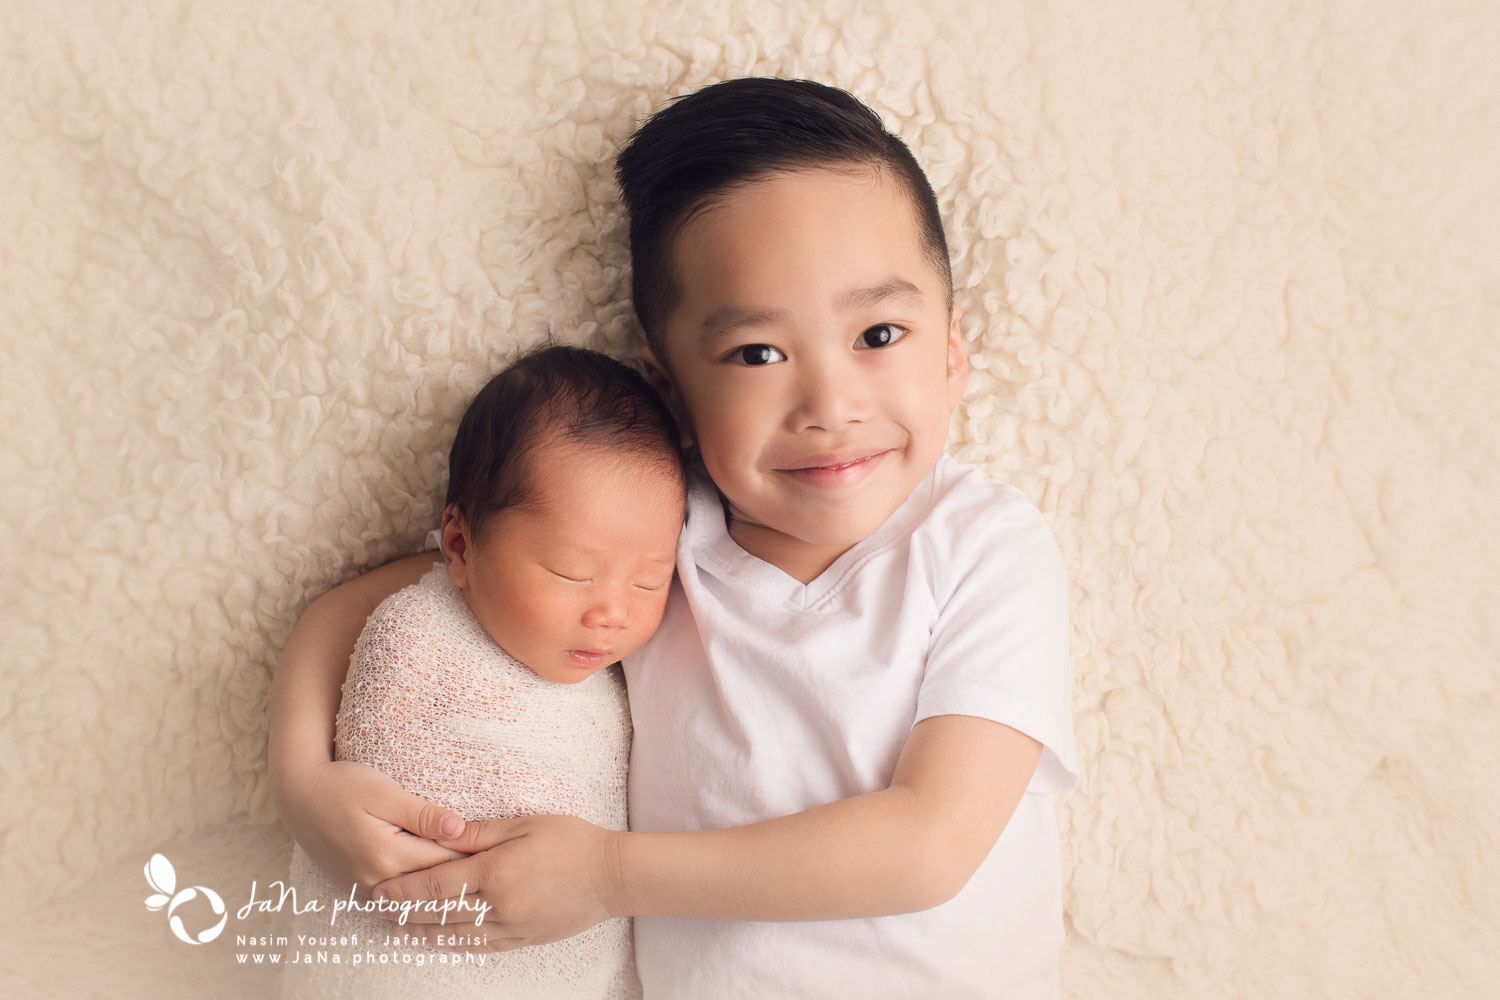 Newborn photography Vancouver - Siblings